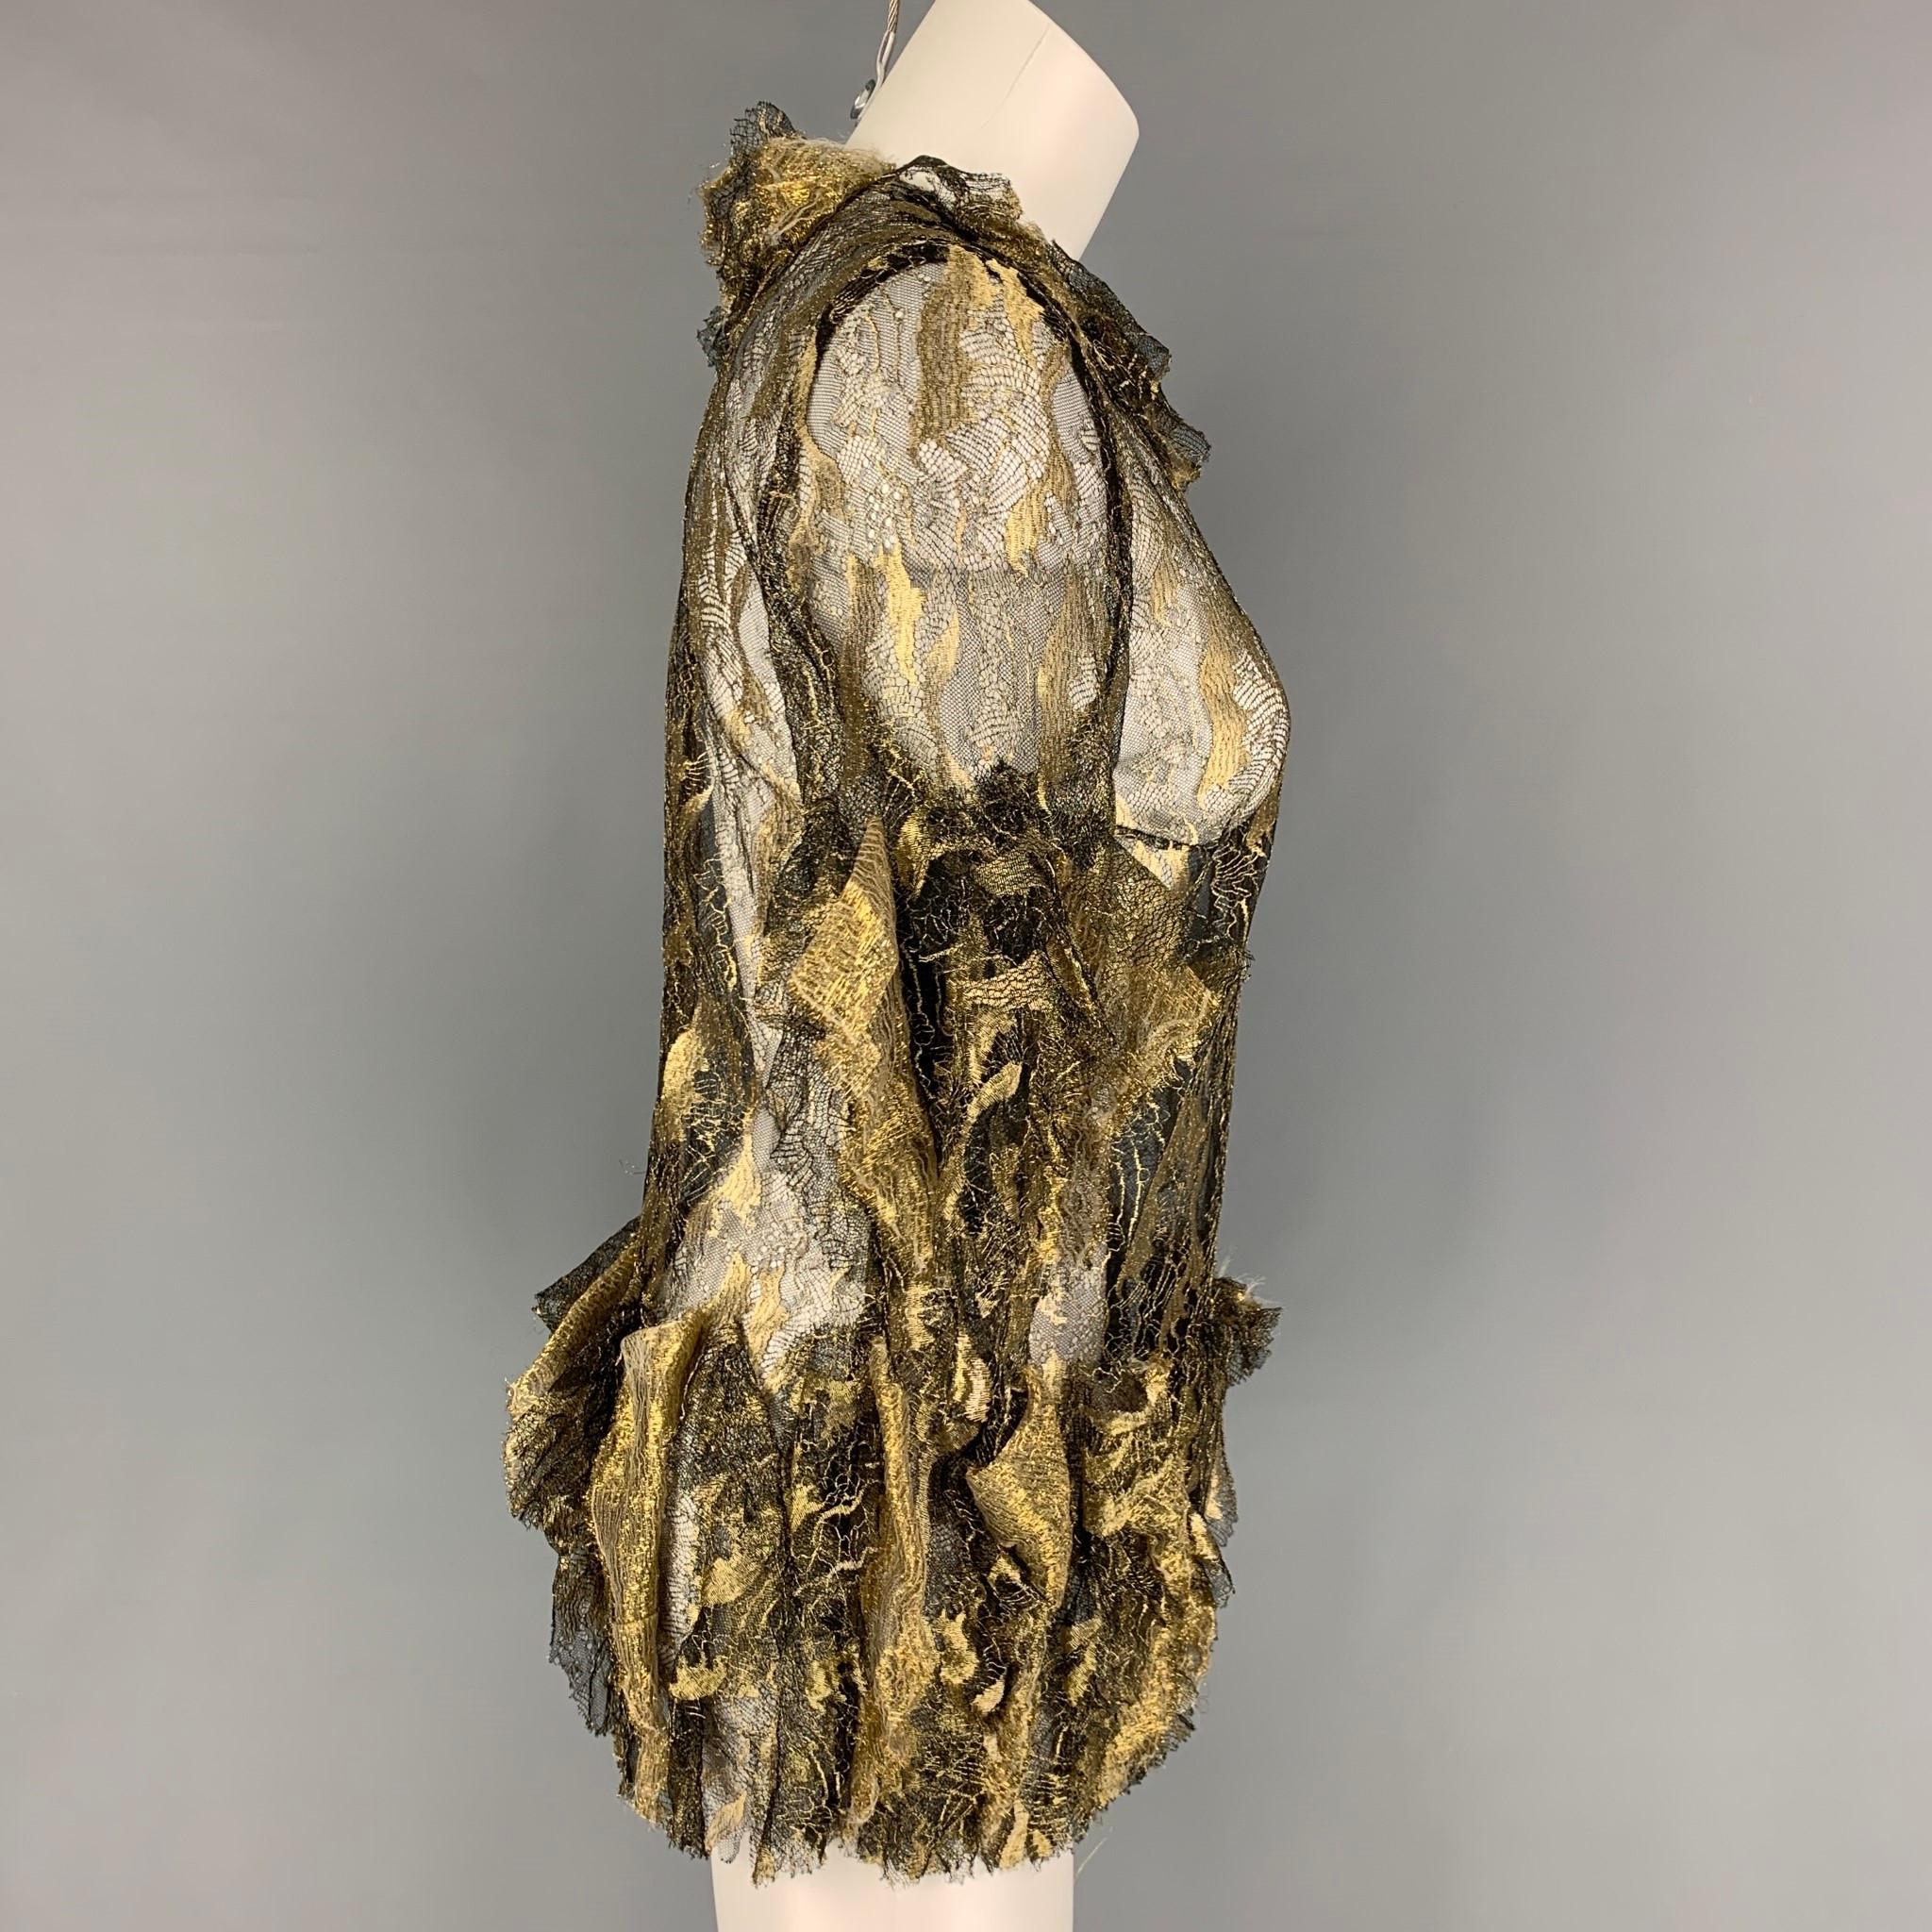 RODARTE dress top comes in a gold & black antique lame polyamide blend featuring a ruffled design, 3/4 sleeves, and a back zip up closure. 

Very Good Pre-Owned Condition.
Marked: 8

Measurements:

Shoulder: 14 in.
Bust: 32 in.
Sleeve: 16